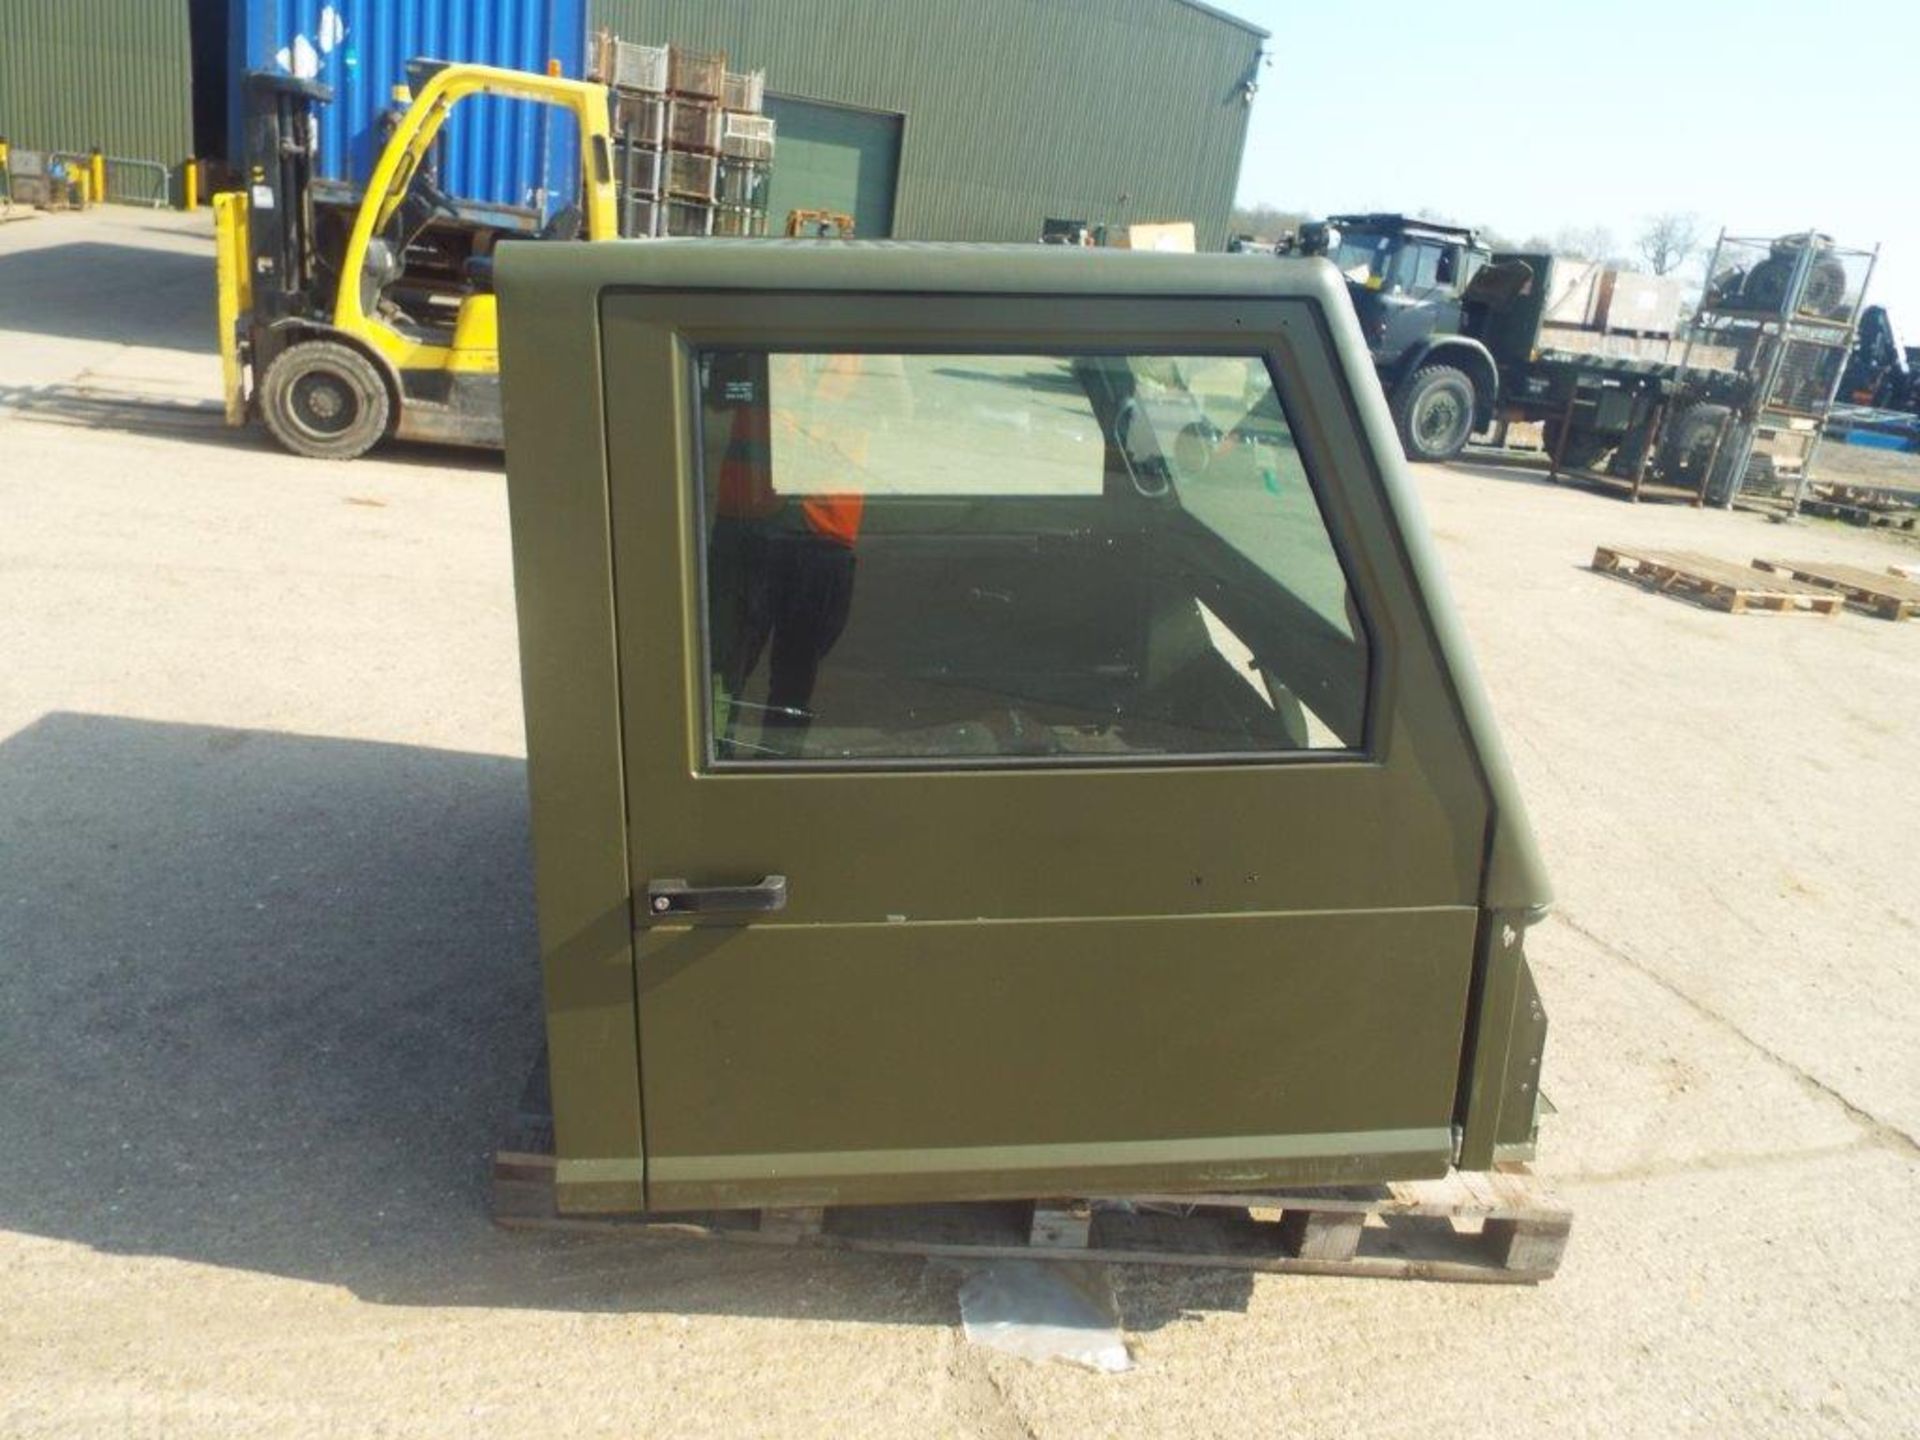 Extremely Rare Unissued Mowag Duro III Cab Assy - Image 8 of 20